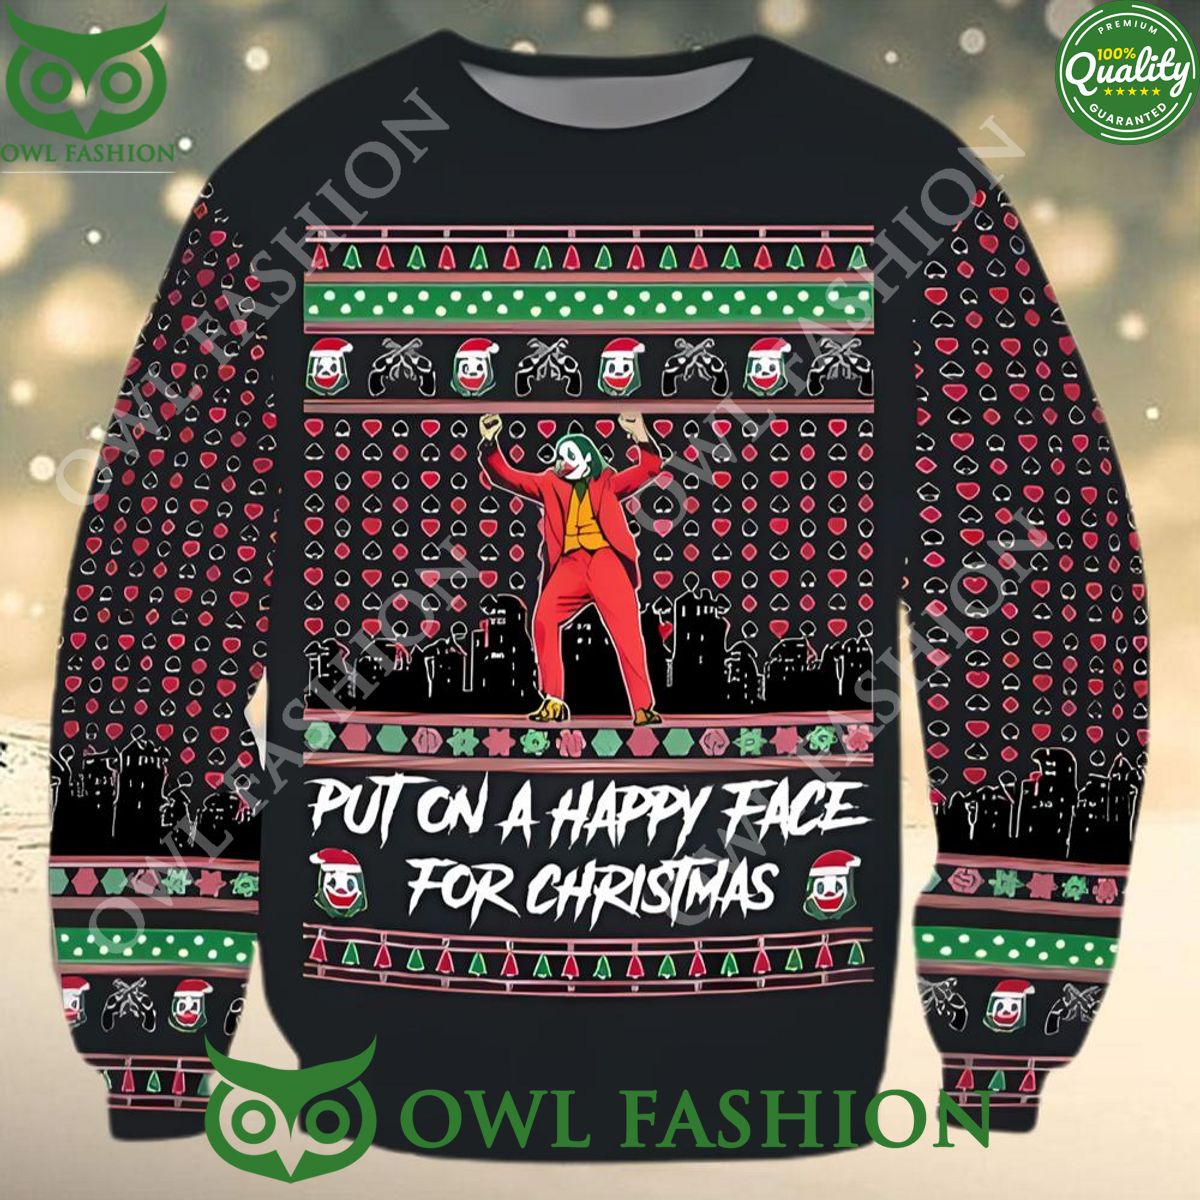 Joker Put On A Happy Face For Christmas Sweater Jumper Black